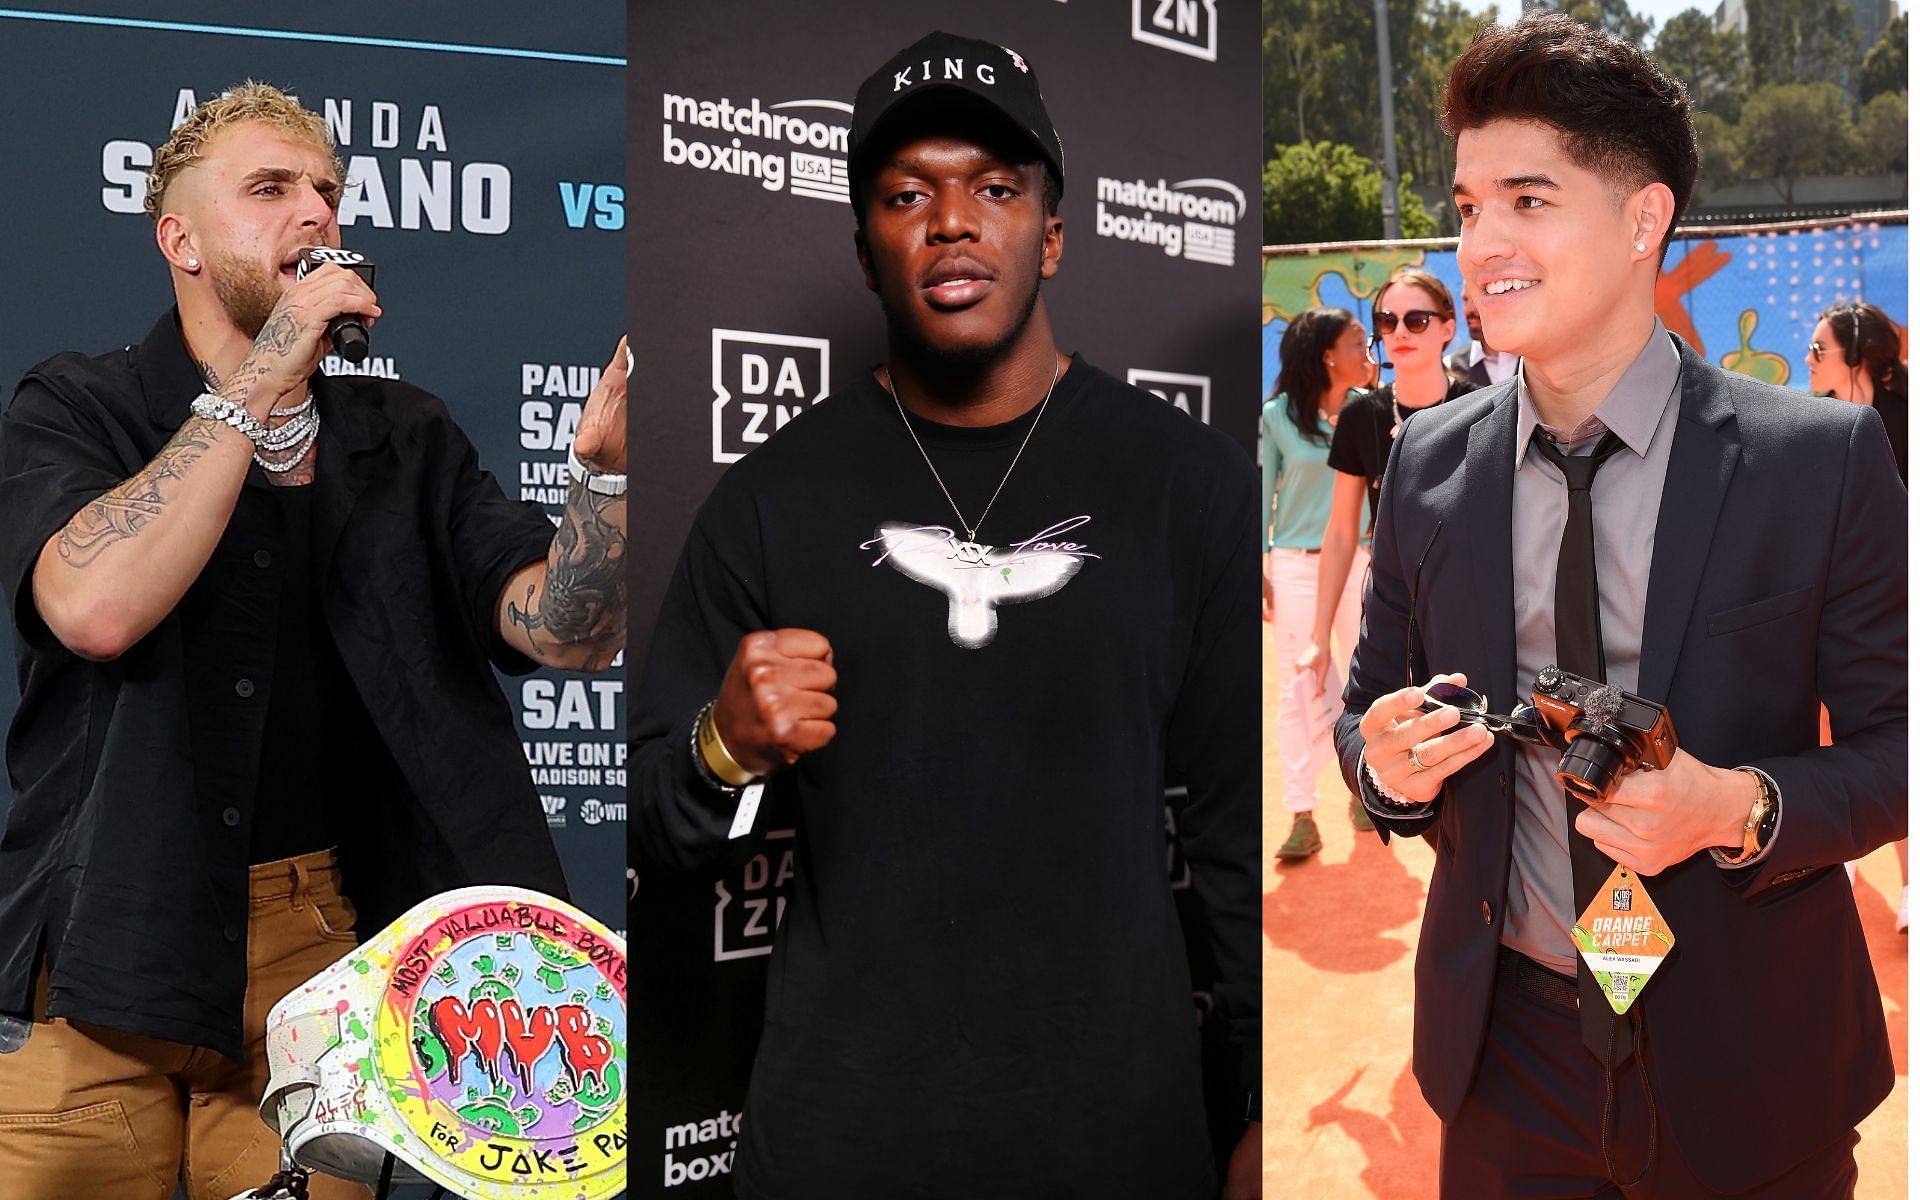 Jake Paul (left), KSI (center), and Alex Wassabi (right) [Image credits Getty Images]